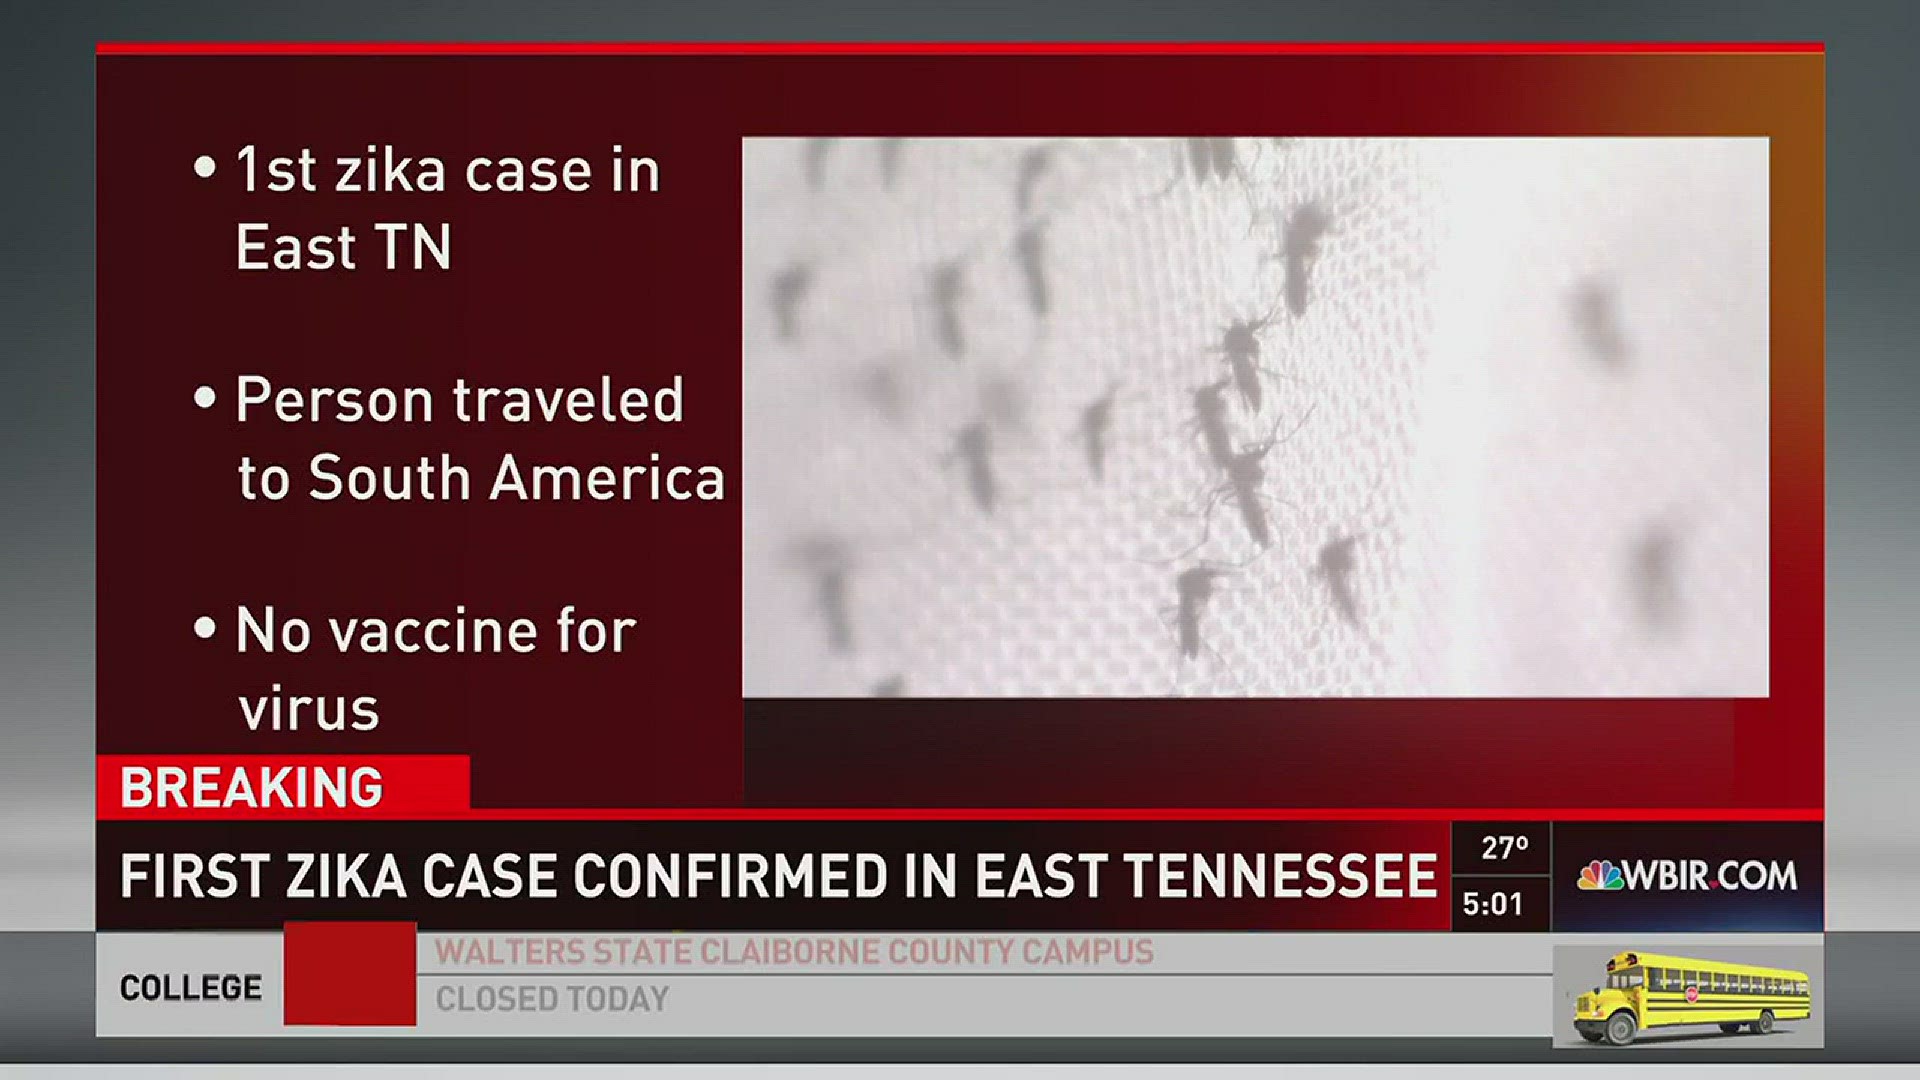 The patient had traveled to South America before coming back to East Tennessee.o